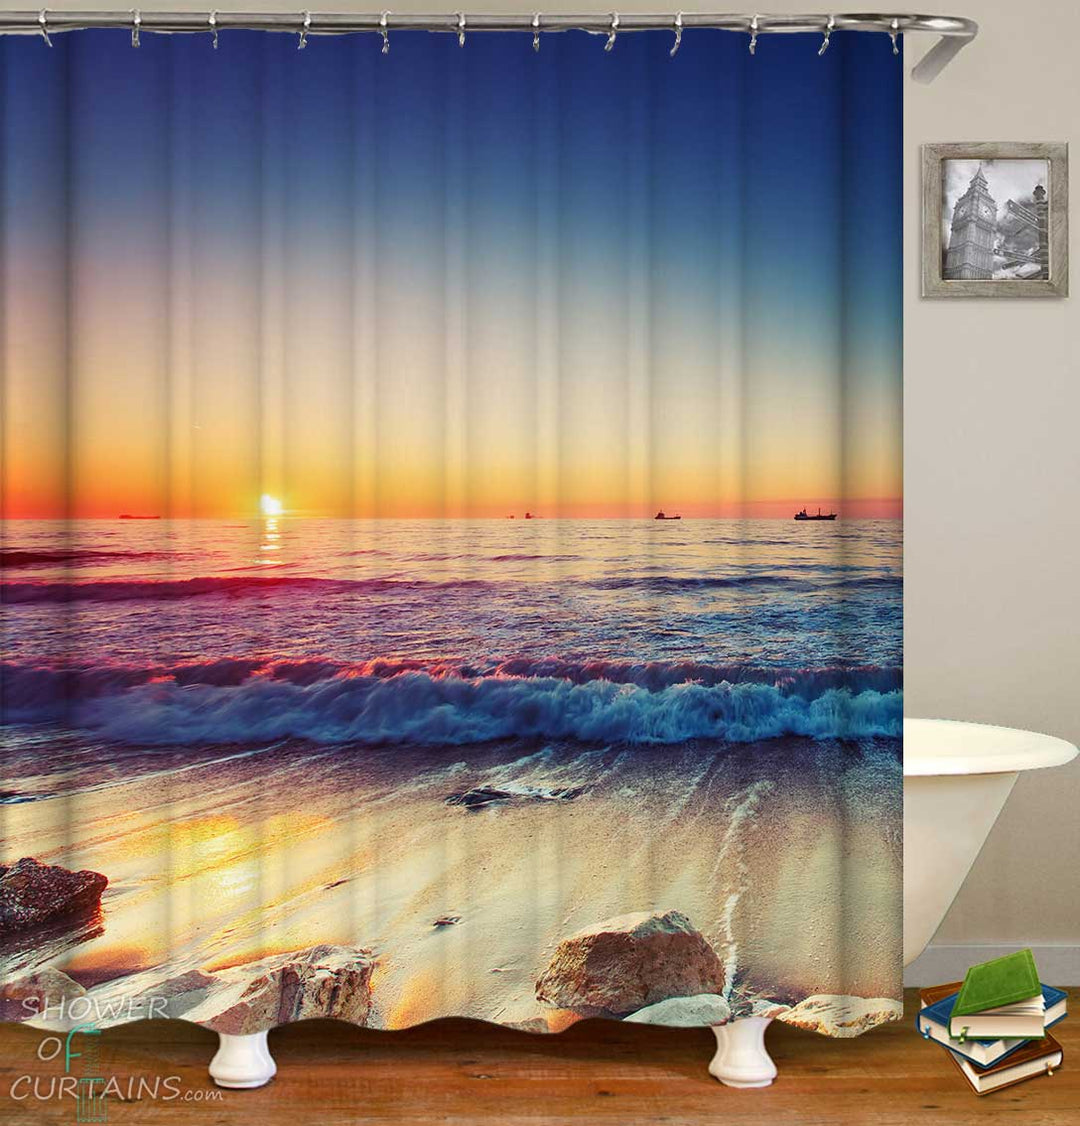 Shower Curtains with Reddish Sunset Ocean